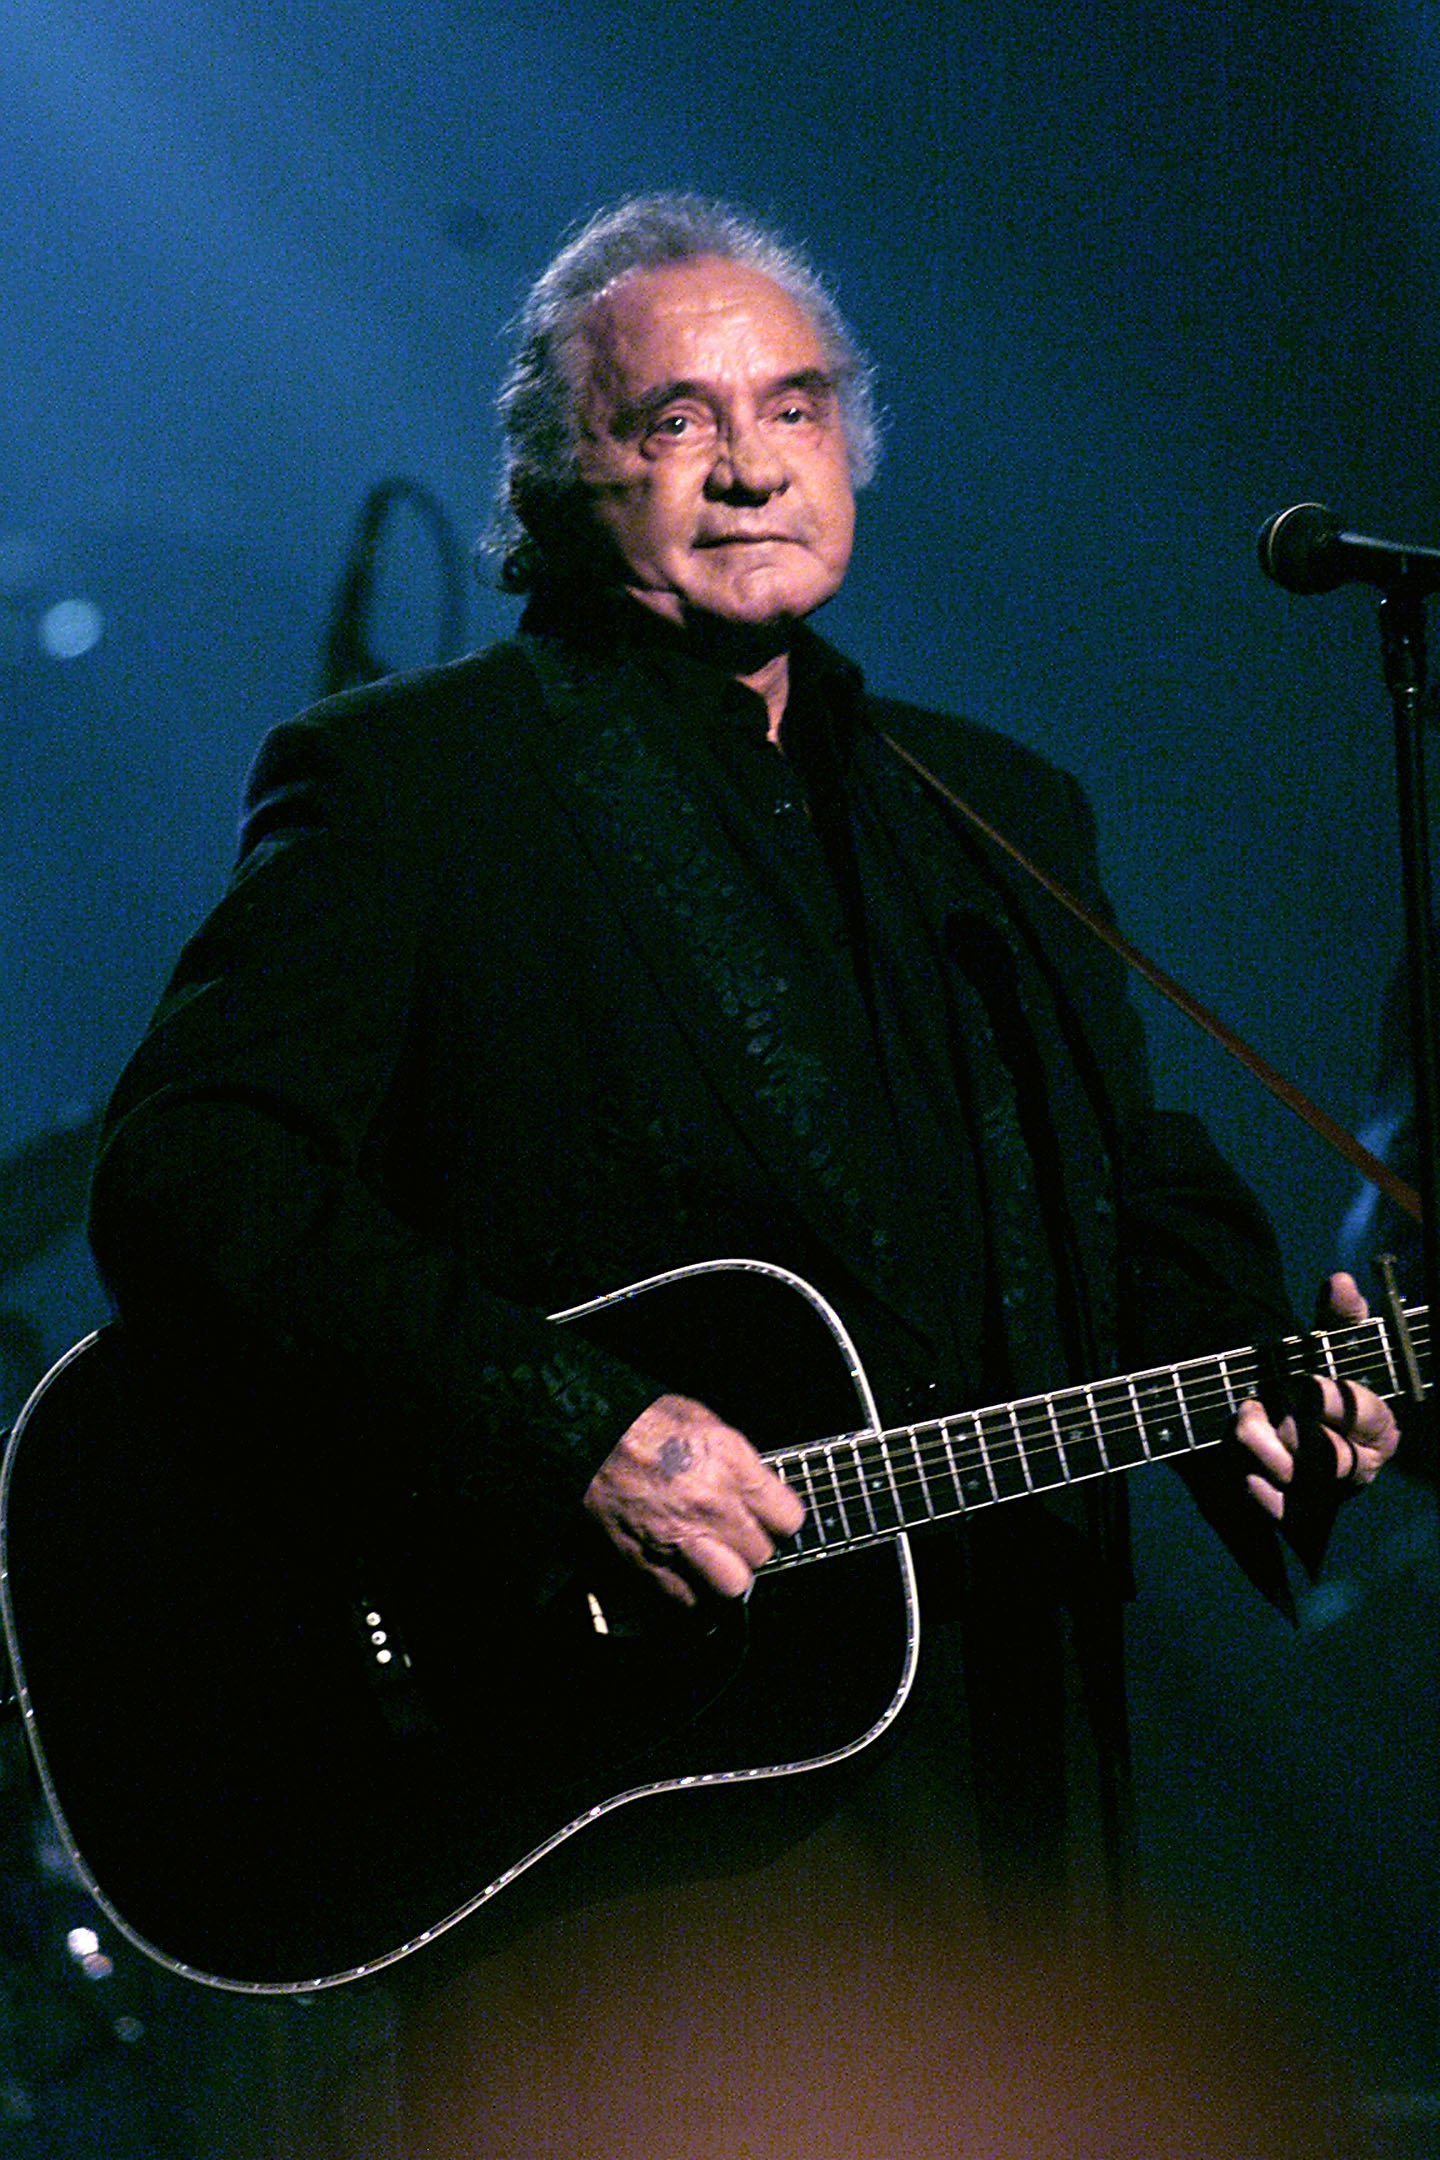 Johnny Cash at the Hammerstein Ballroom, April 18, 1999 | Photo: GettyImages